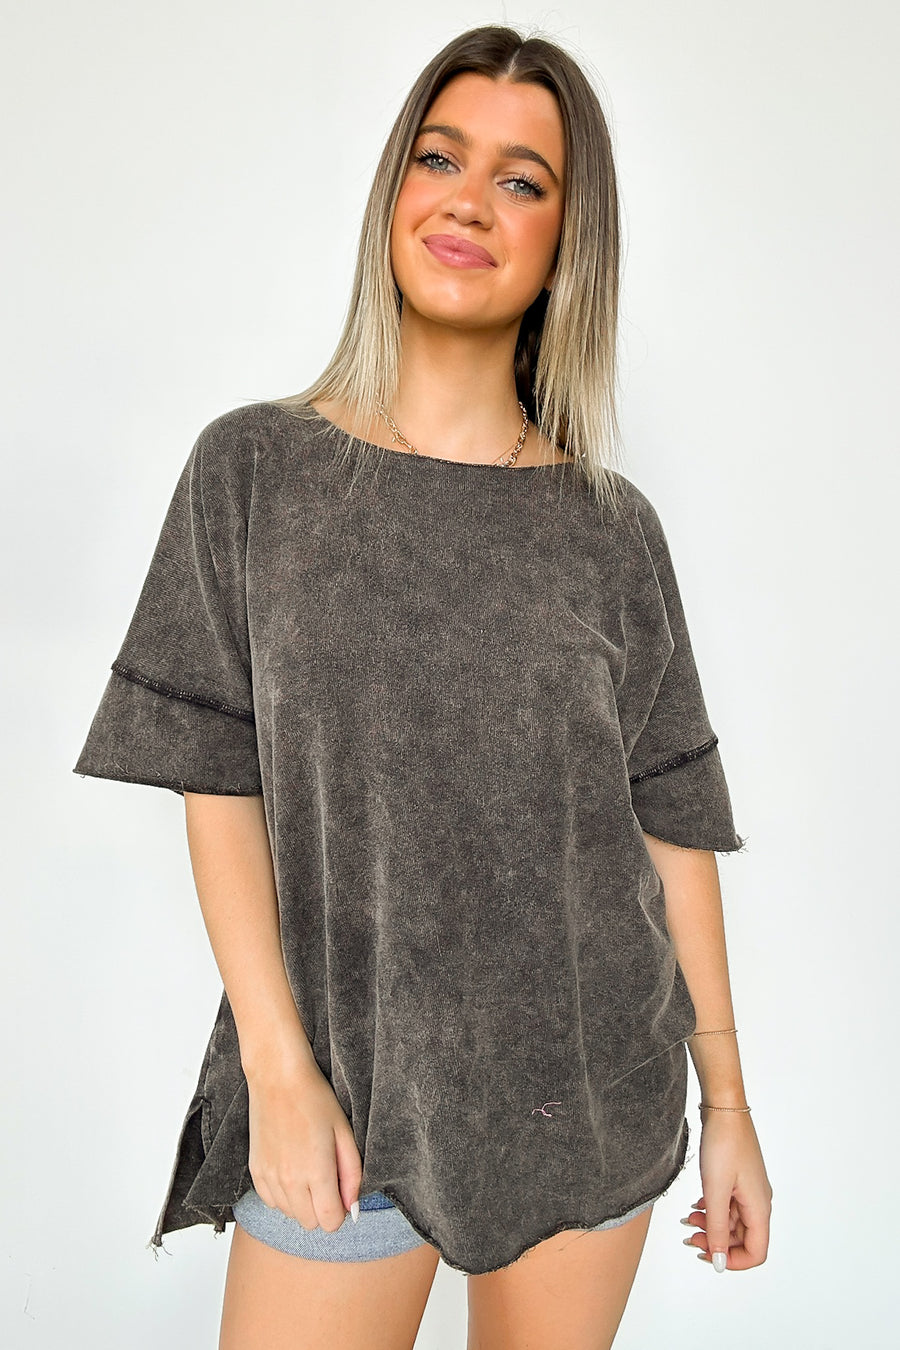  Amayah Mineral Wash Raw Edge Top - Madison and Mallory